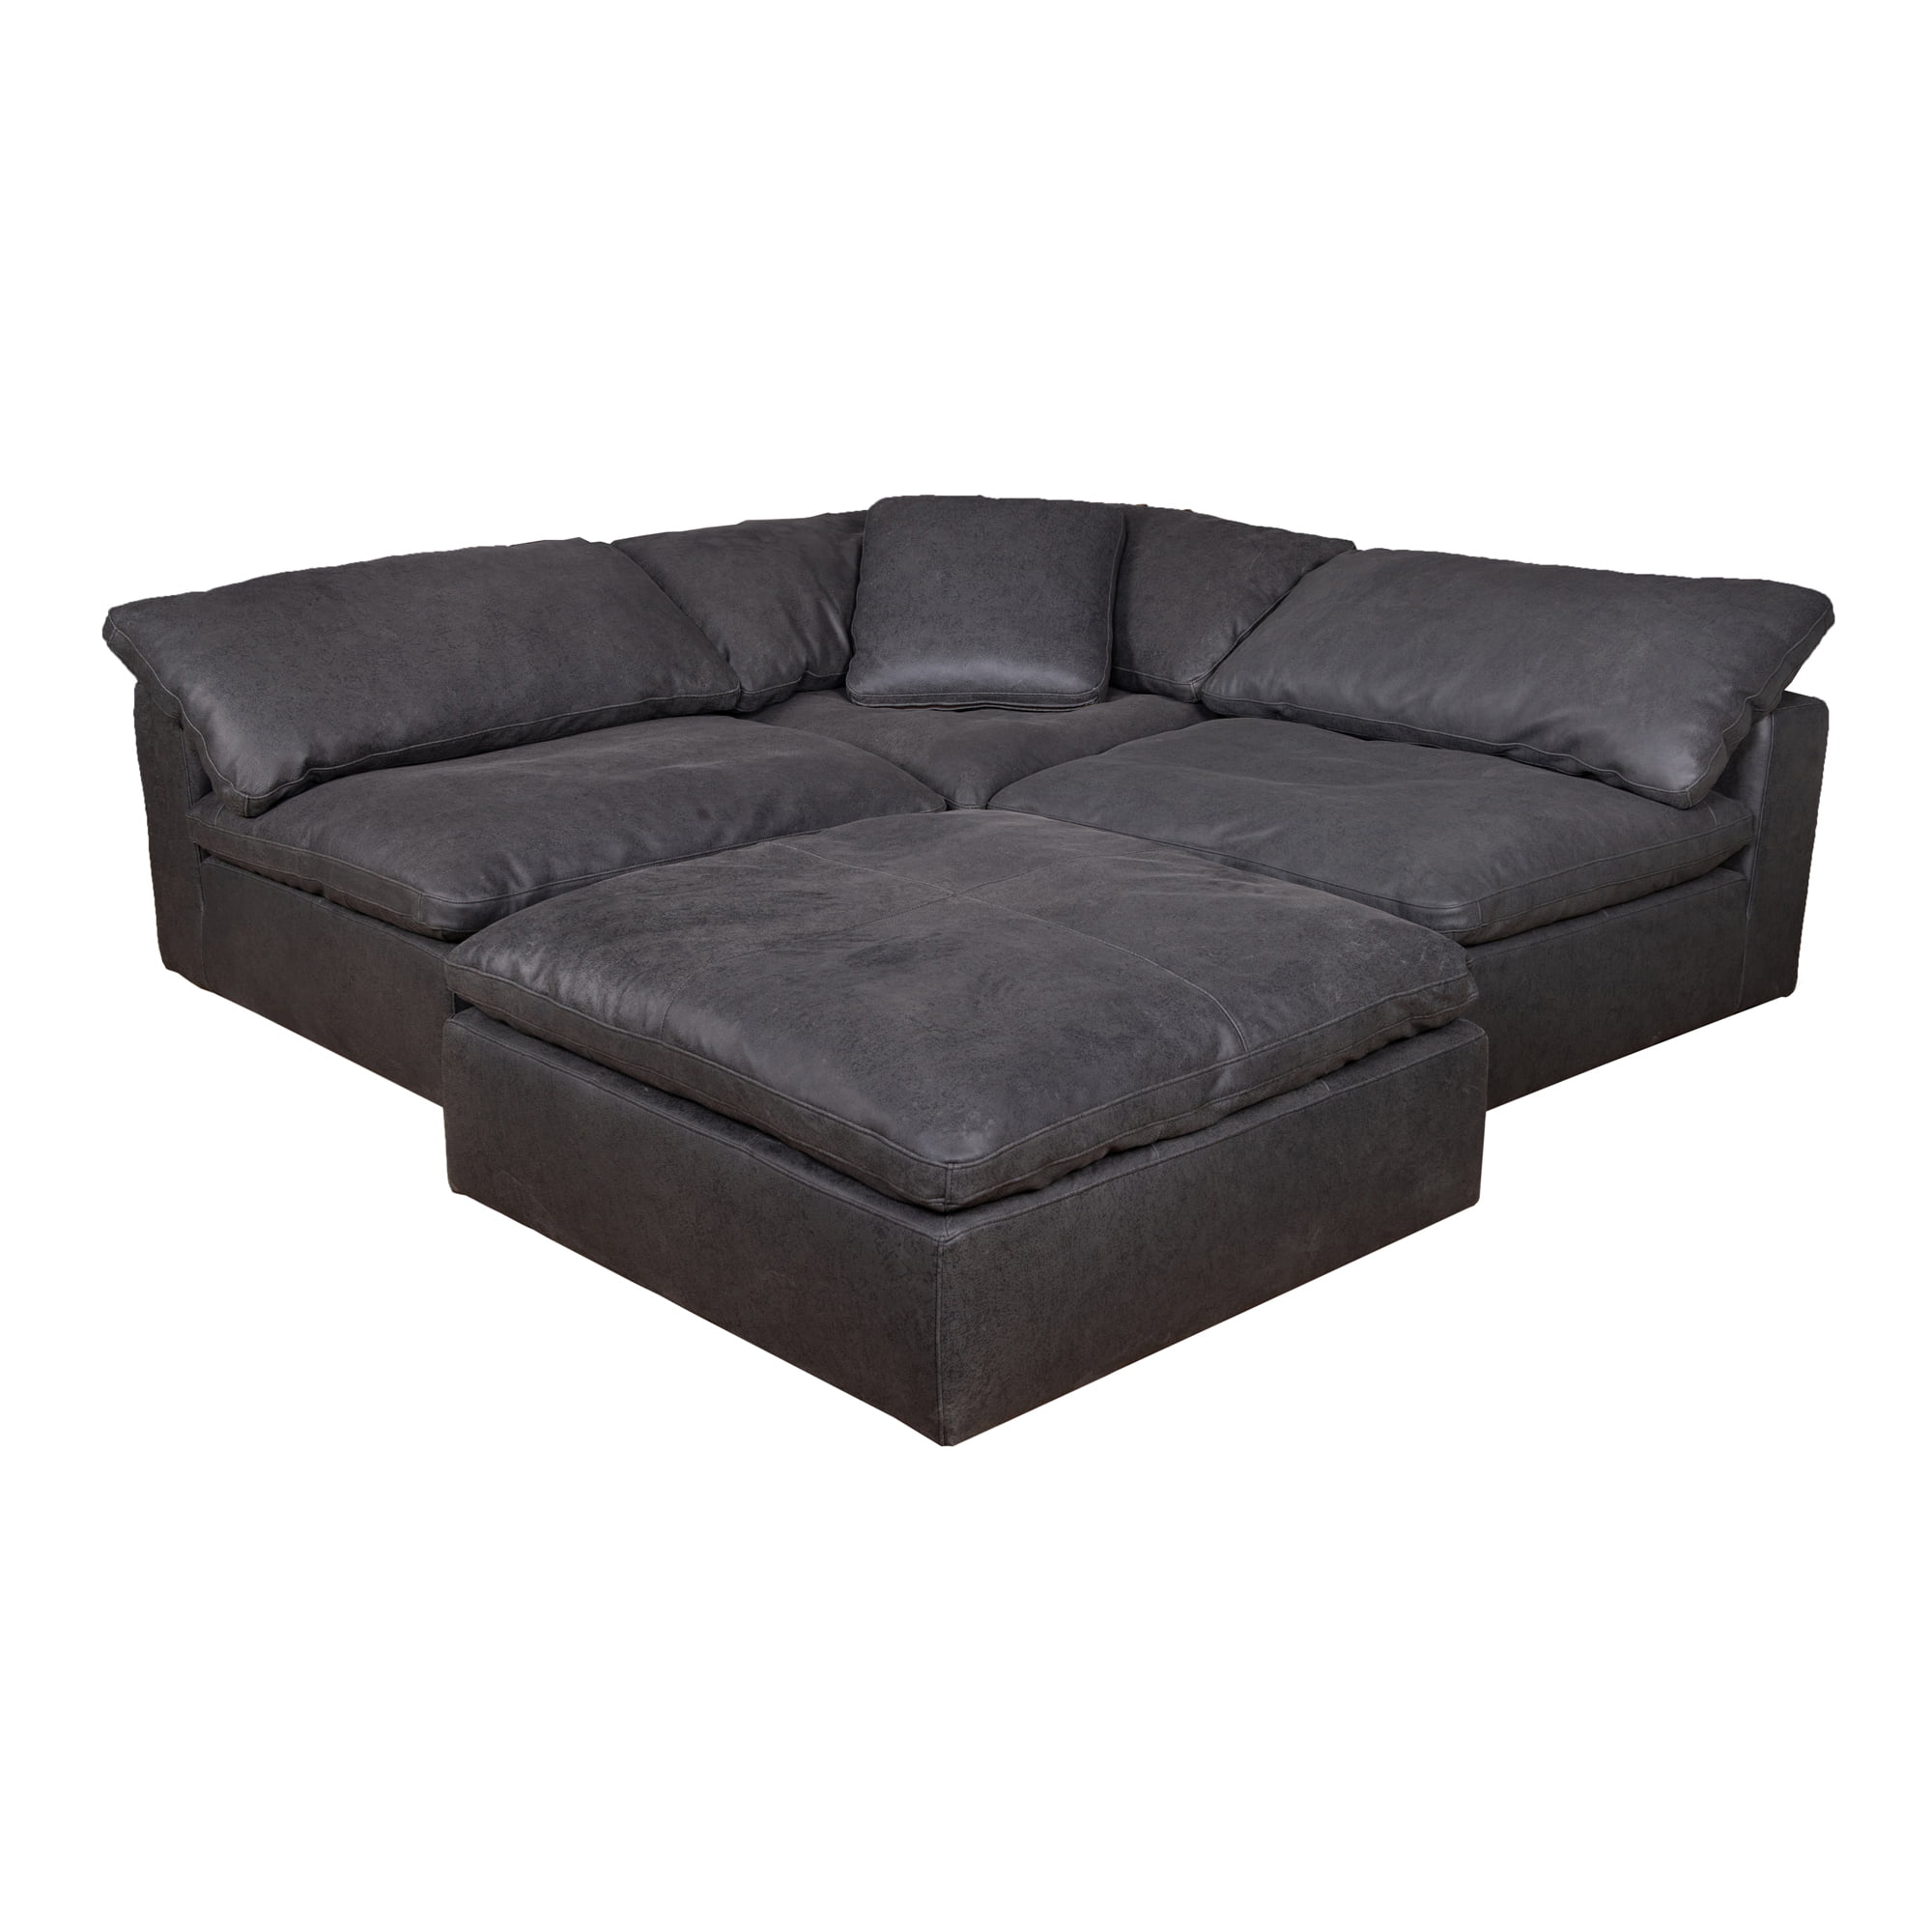 Moe S Home Clay Nubuck Leather Black, Moe Top Grain Distressed Brown Leather Power Reclining Sectional Sofa